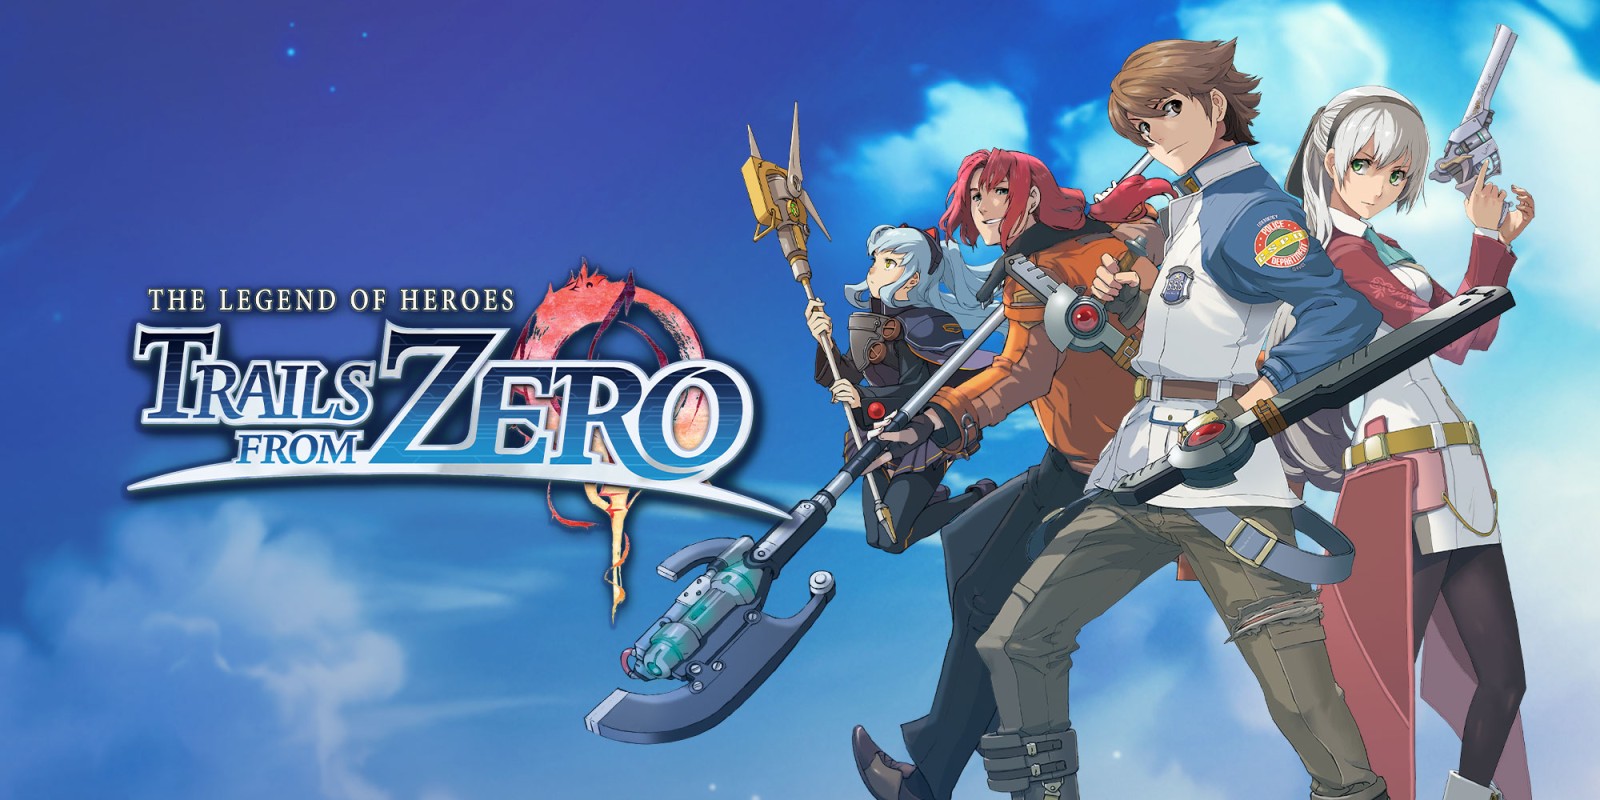 The Legend of Heroes: Trails from Zero Switch gameplay